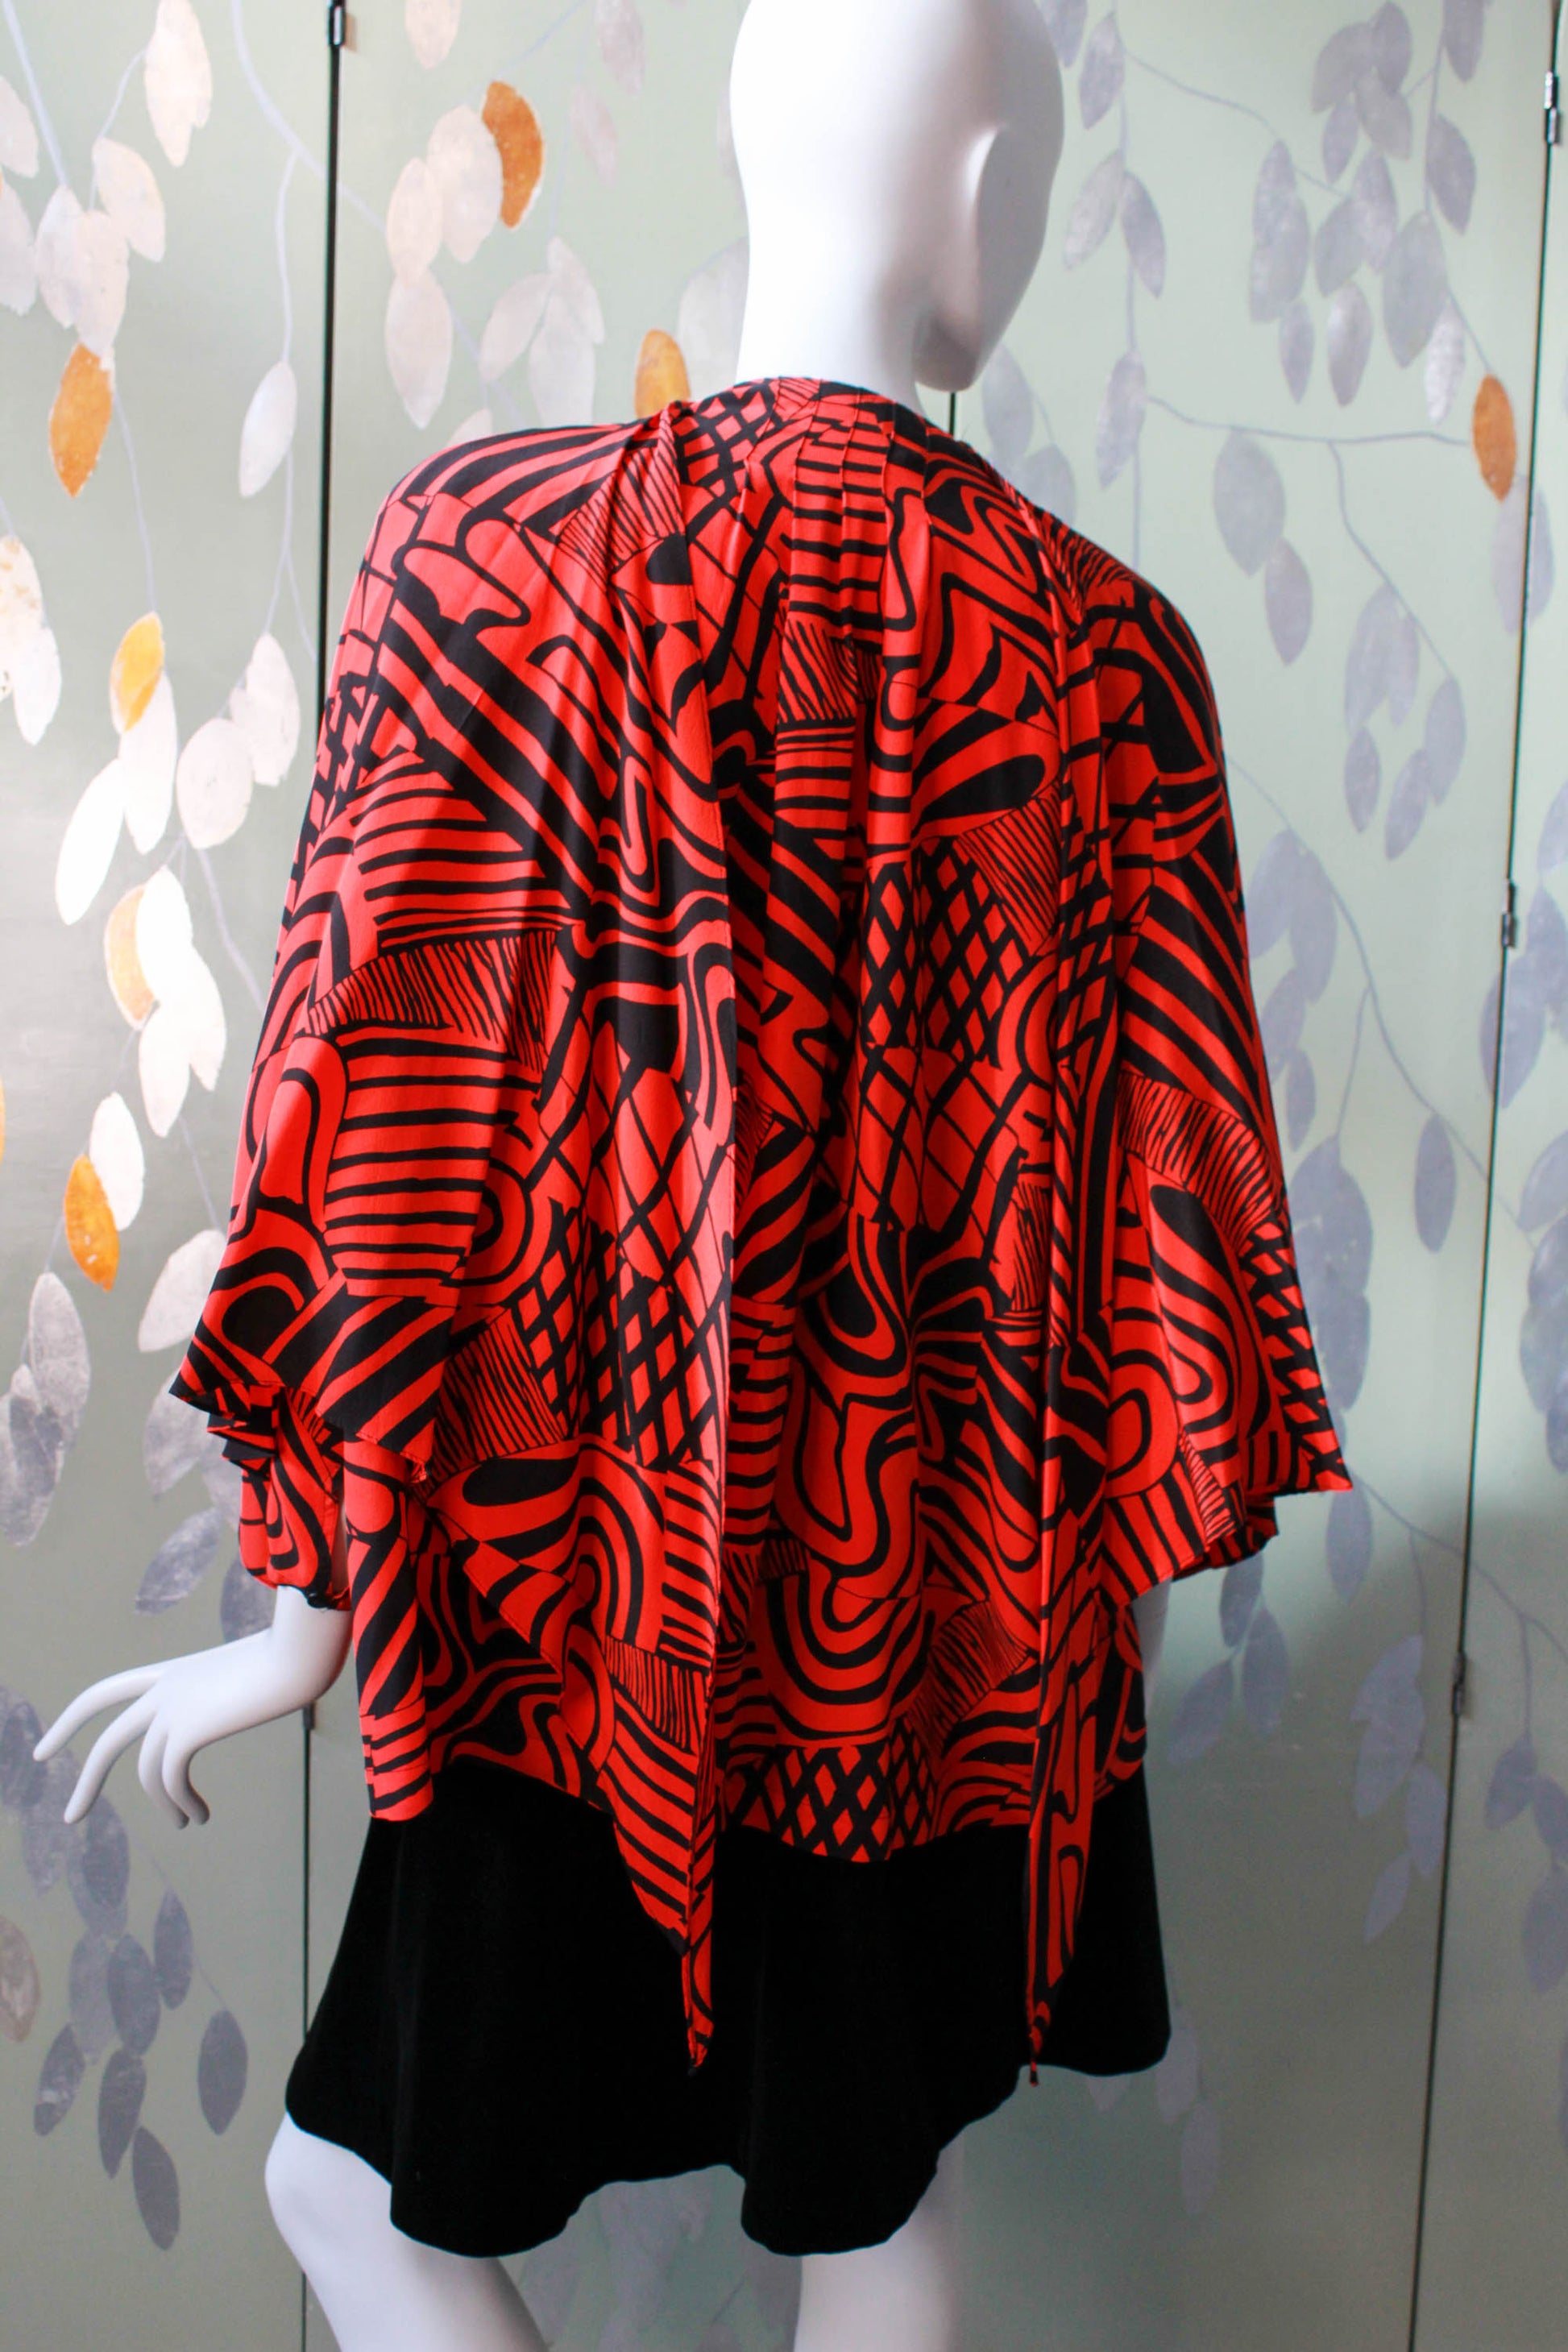 1980s red and black abstract print silk blouse with cape tie front layer